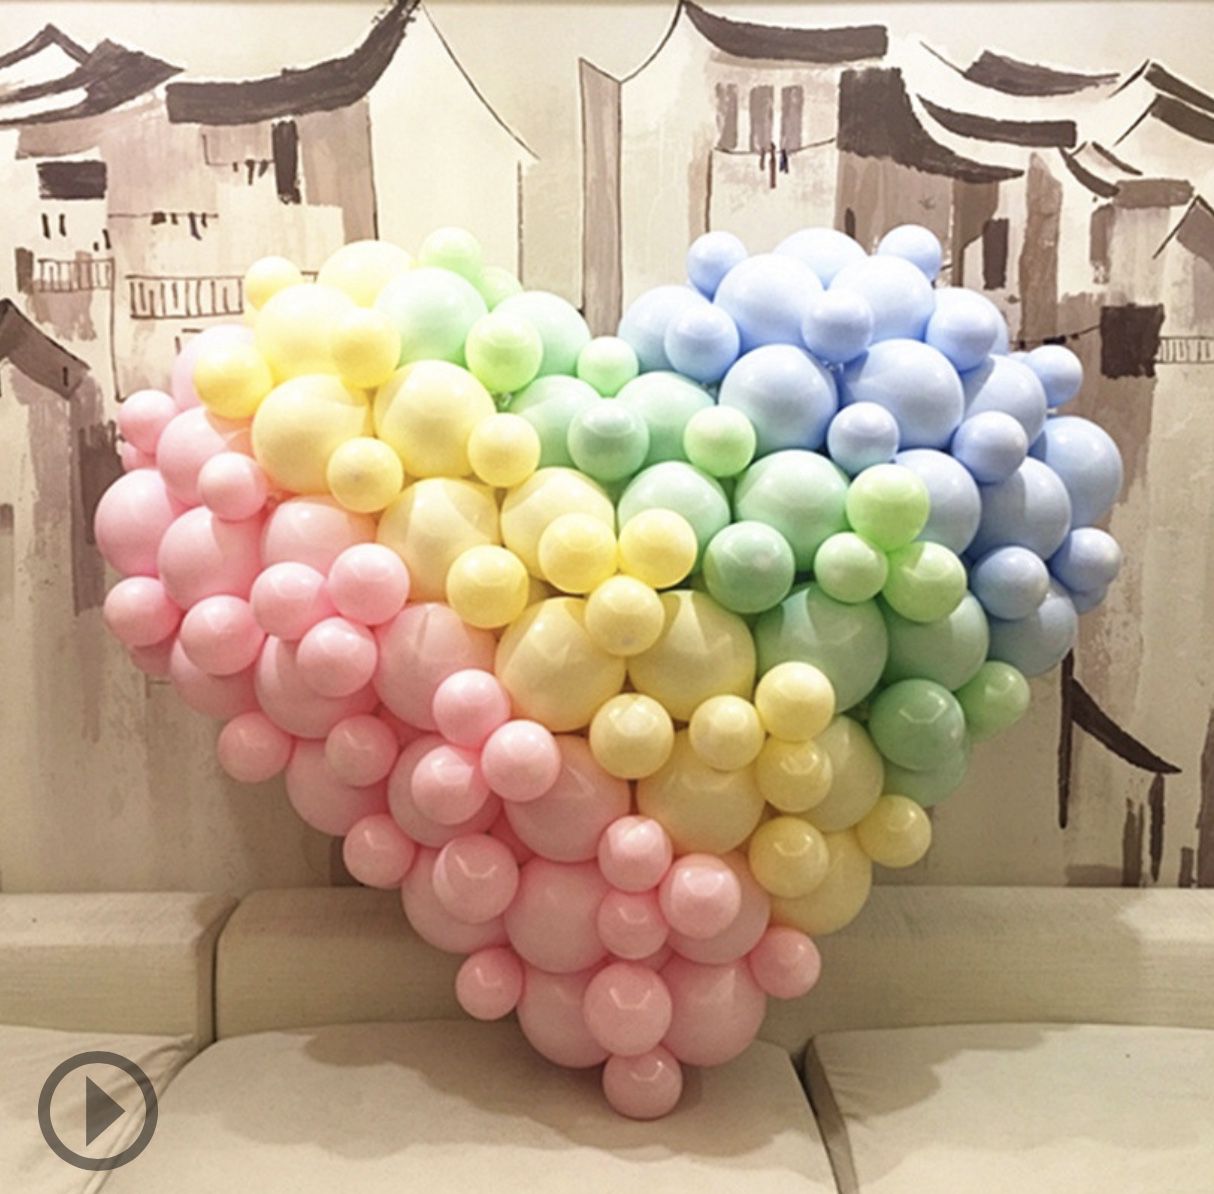 100 pcs | Candy Cotton 10 Inches Balloons